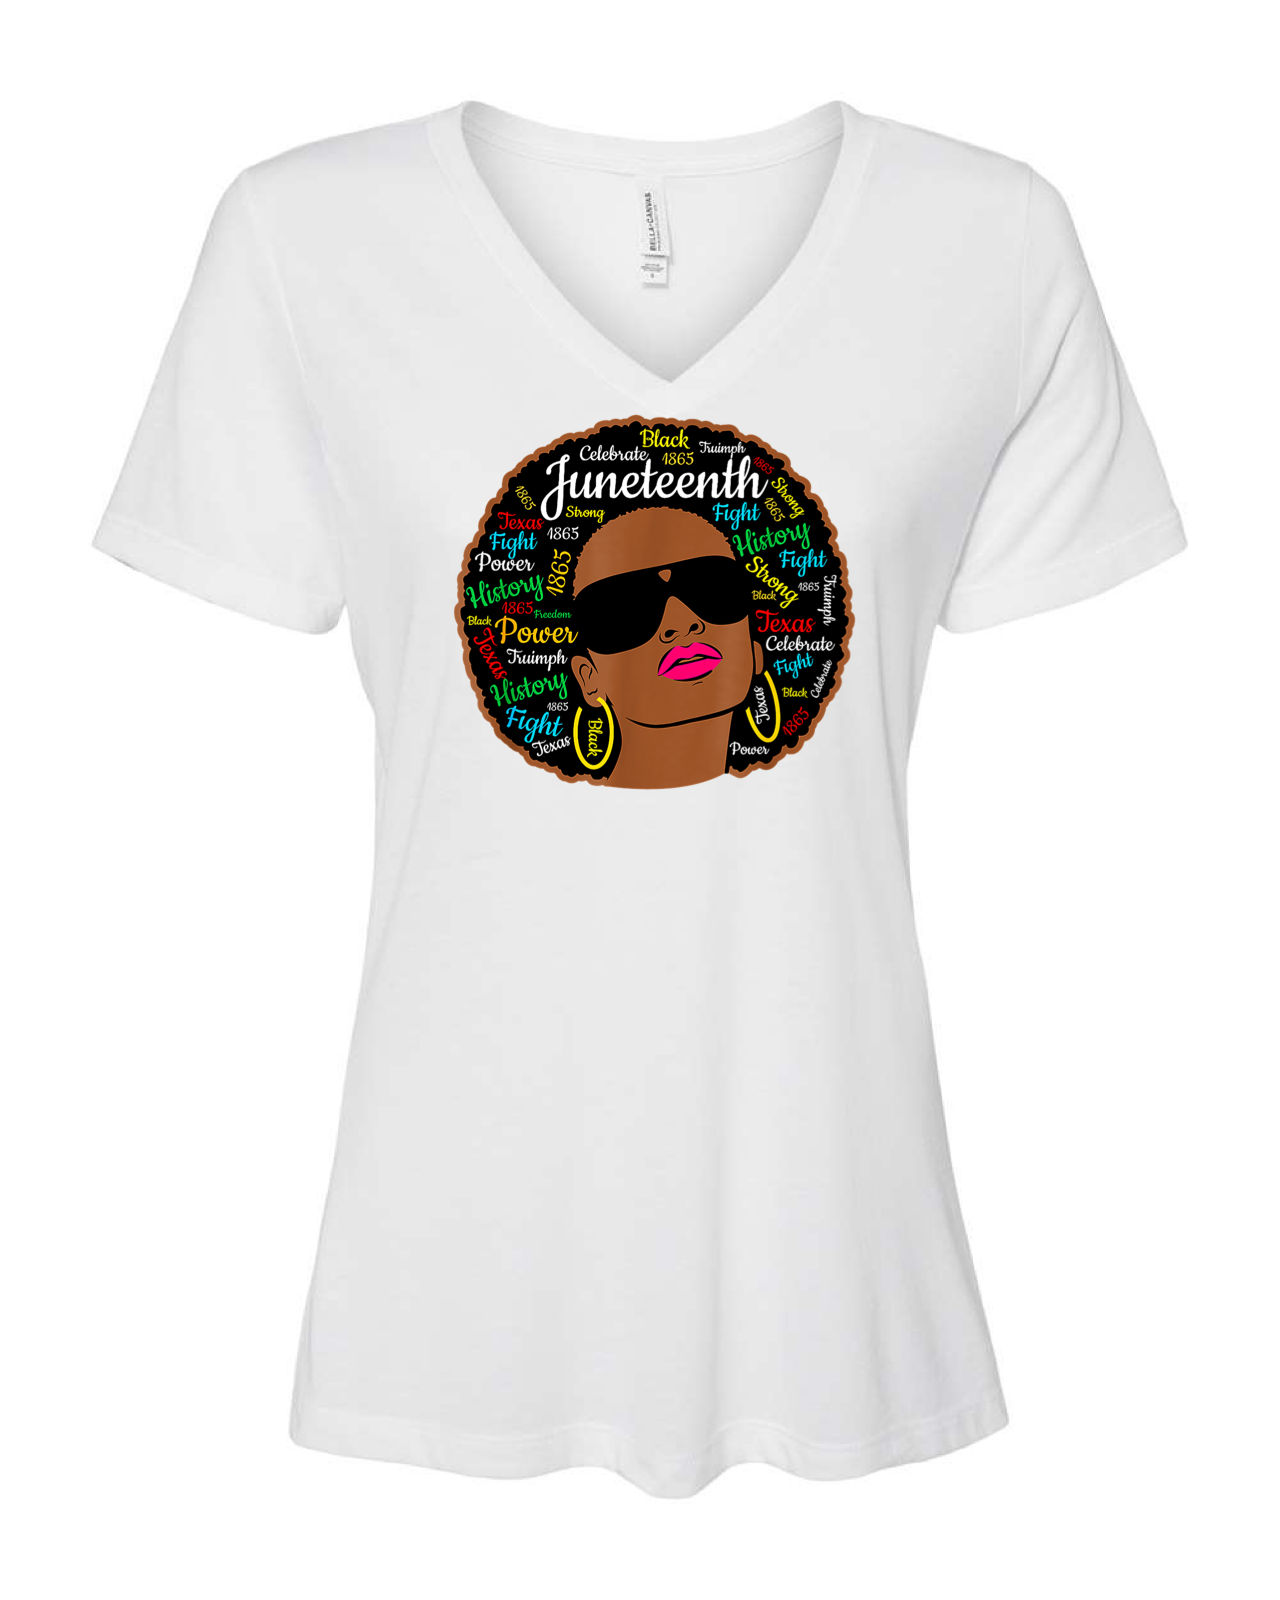 White t-shirt for Juneteenth